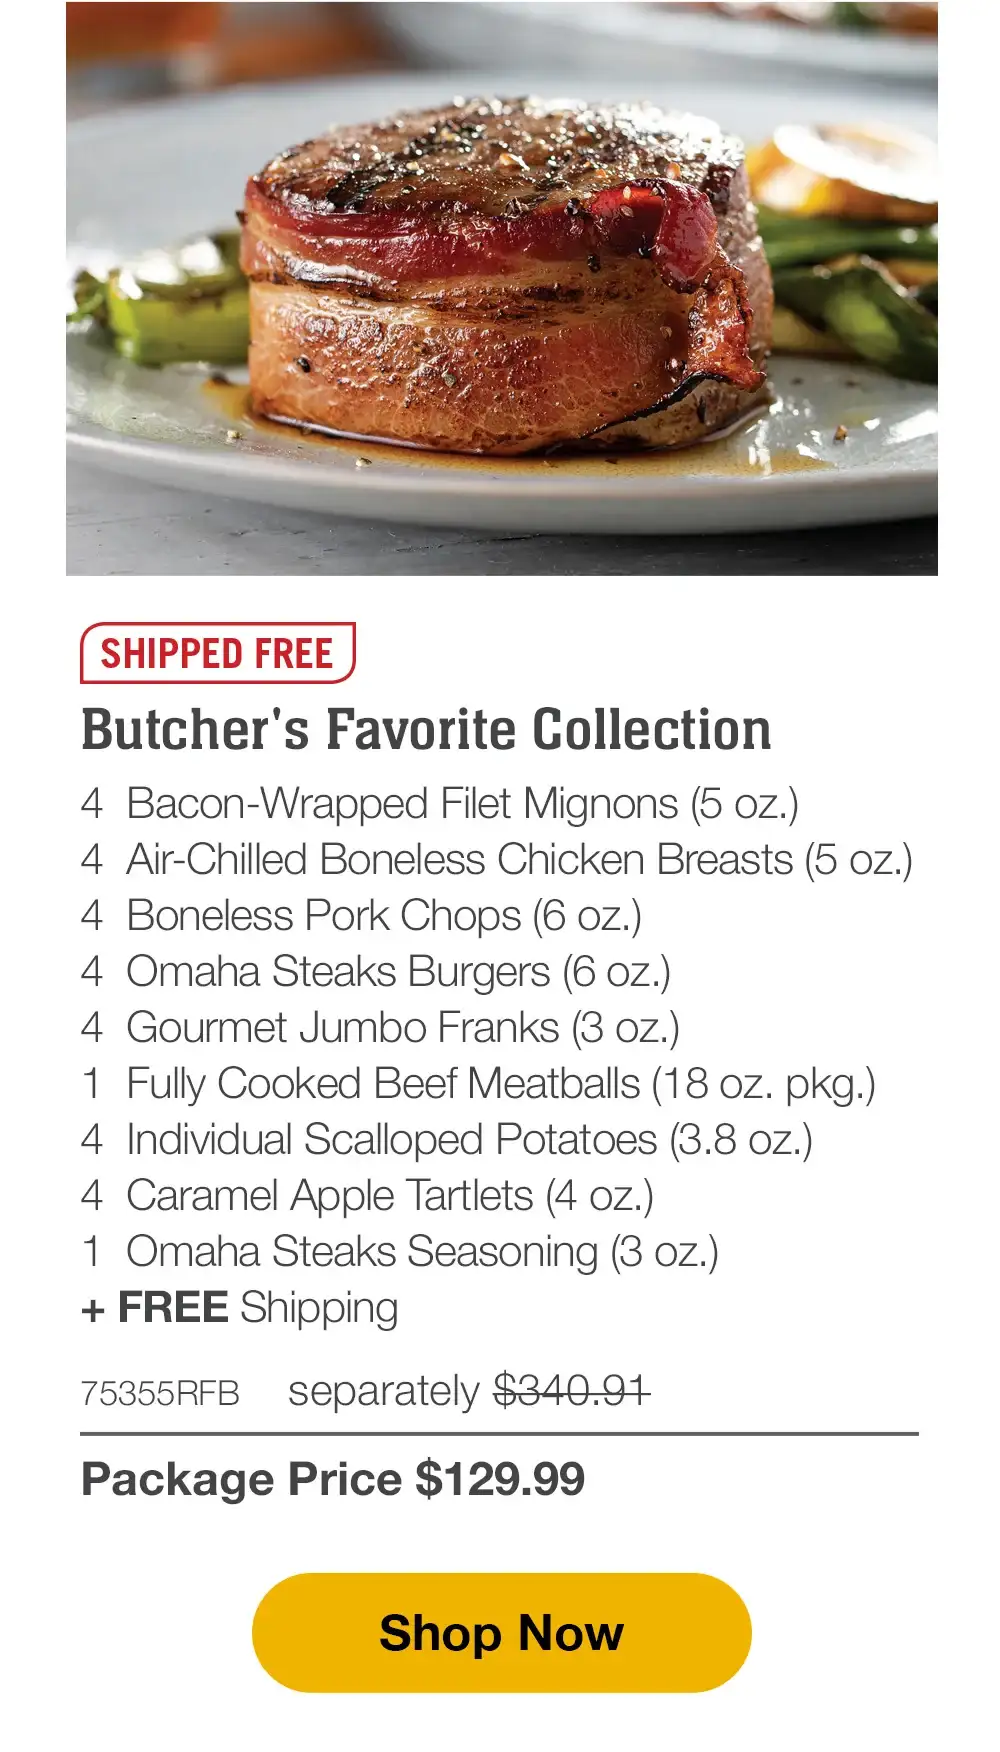 SHIPPED FREE | Deluxe Gourmet Collection - 4 Bacon-Wrapped Filet Mignons (5 oz.) - 4 Air-Chilled Boneless Chicken Breasts (5 oz.) - 4 Boneless Pork Chops (6 oz.) - 8 Omaha Steaks Burgers (6 oz.) - 4 Gourmet Jumbo Franks (3 oz.) - 1 Fully Cooked Beef Meatballs (18 oz. pkg.) - 4 Individual Scalloped Potatoes (3.8 oz.) - 4 Caramel Apple Tartlets (4 oz.) - 1 Omaha Steaks Seasoning (3 oz.) - 74579RFB separately \\$375.97 | Package Price \\$129.99 || Shop Now